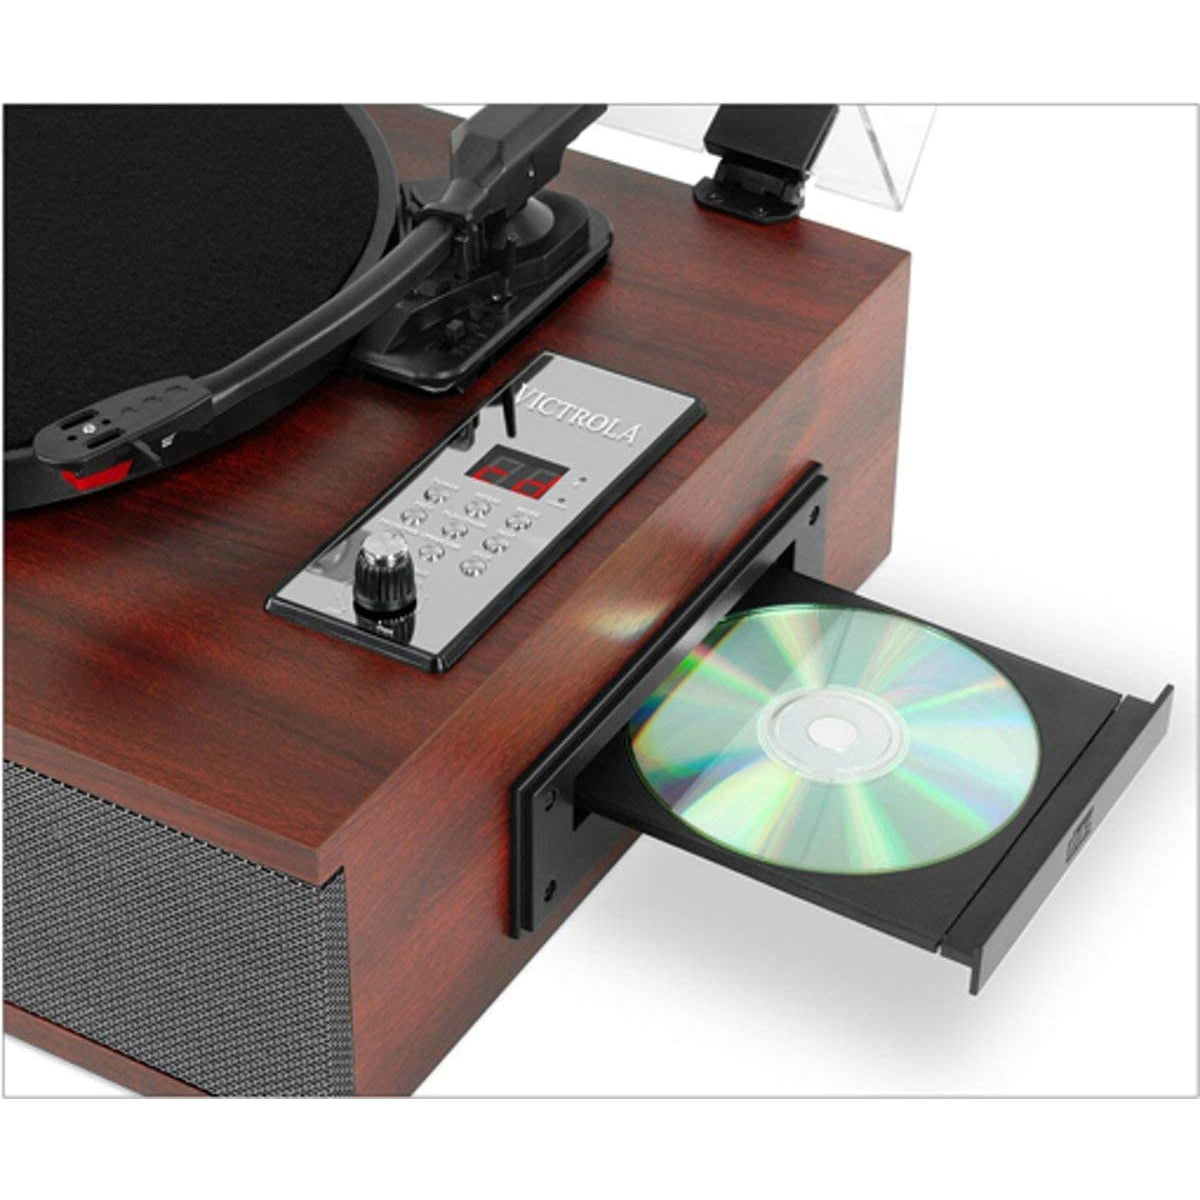 Victrola Park Avenue 5 in 1 Wood Record Player with 3-Speed Turntable - Espresso